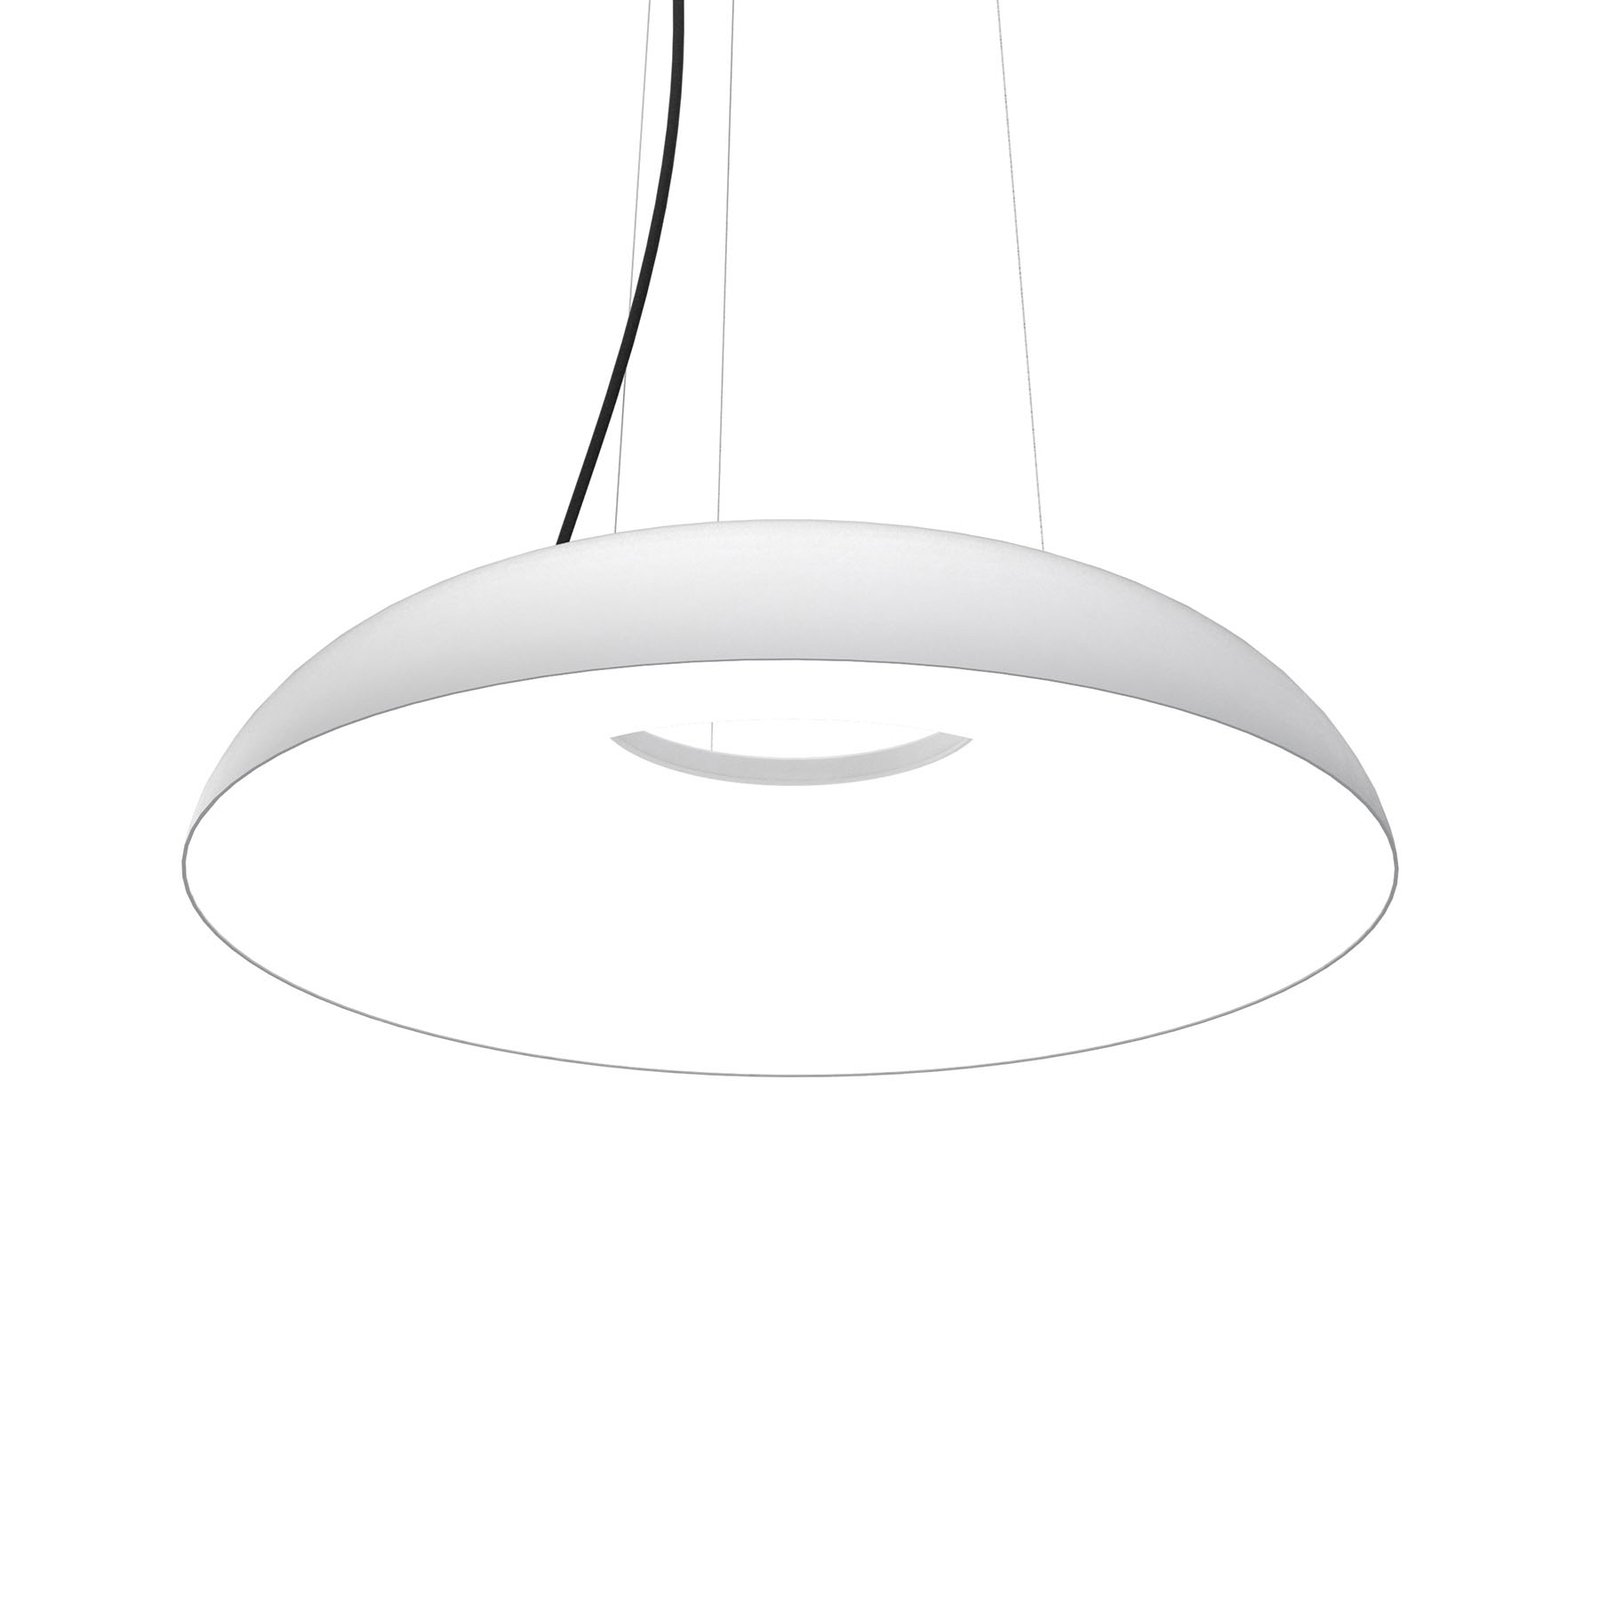 Martinelli Luce Maggiolone hanglamp 930 85cm wit